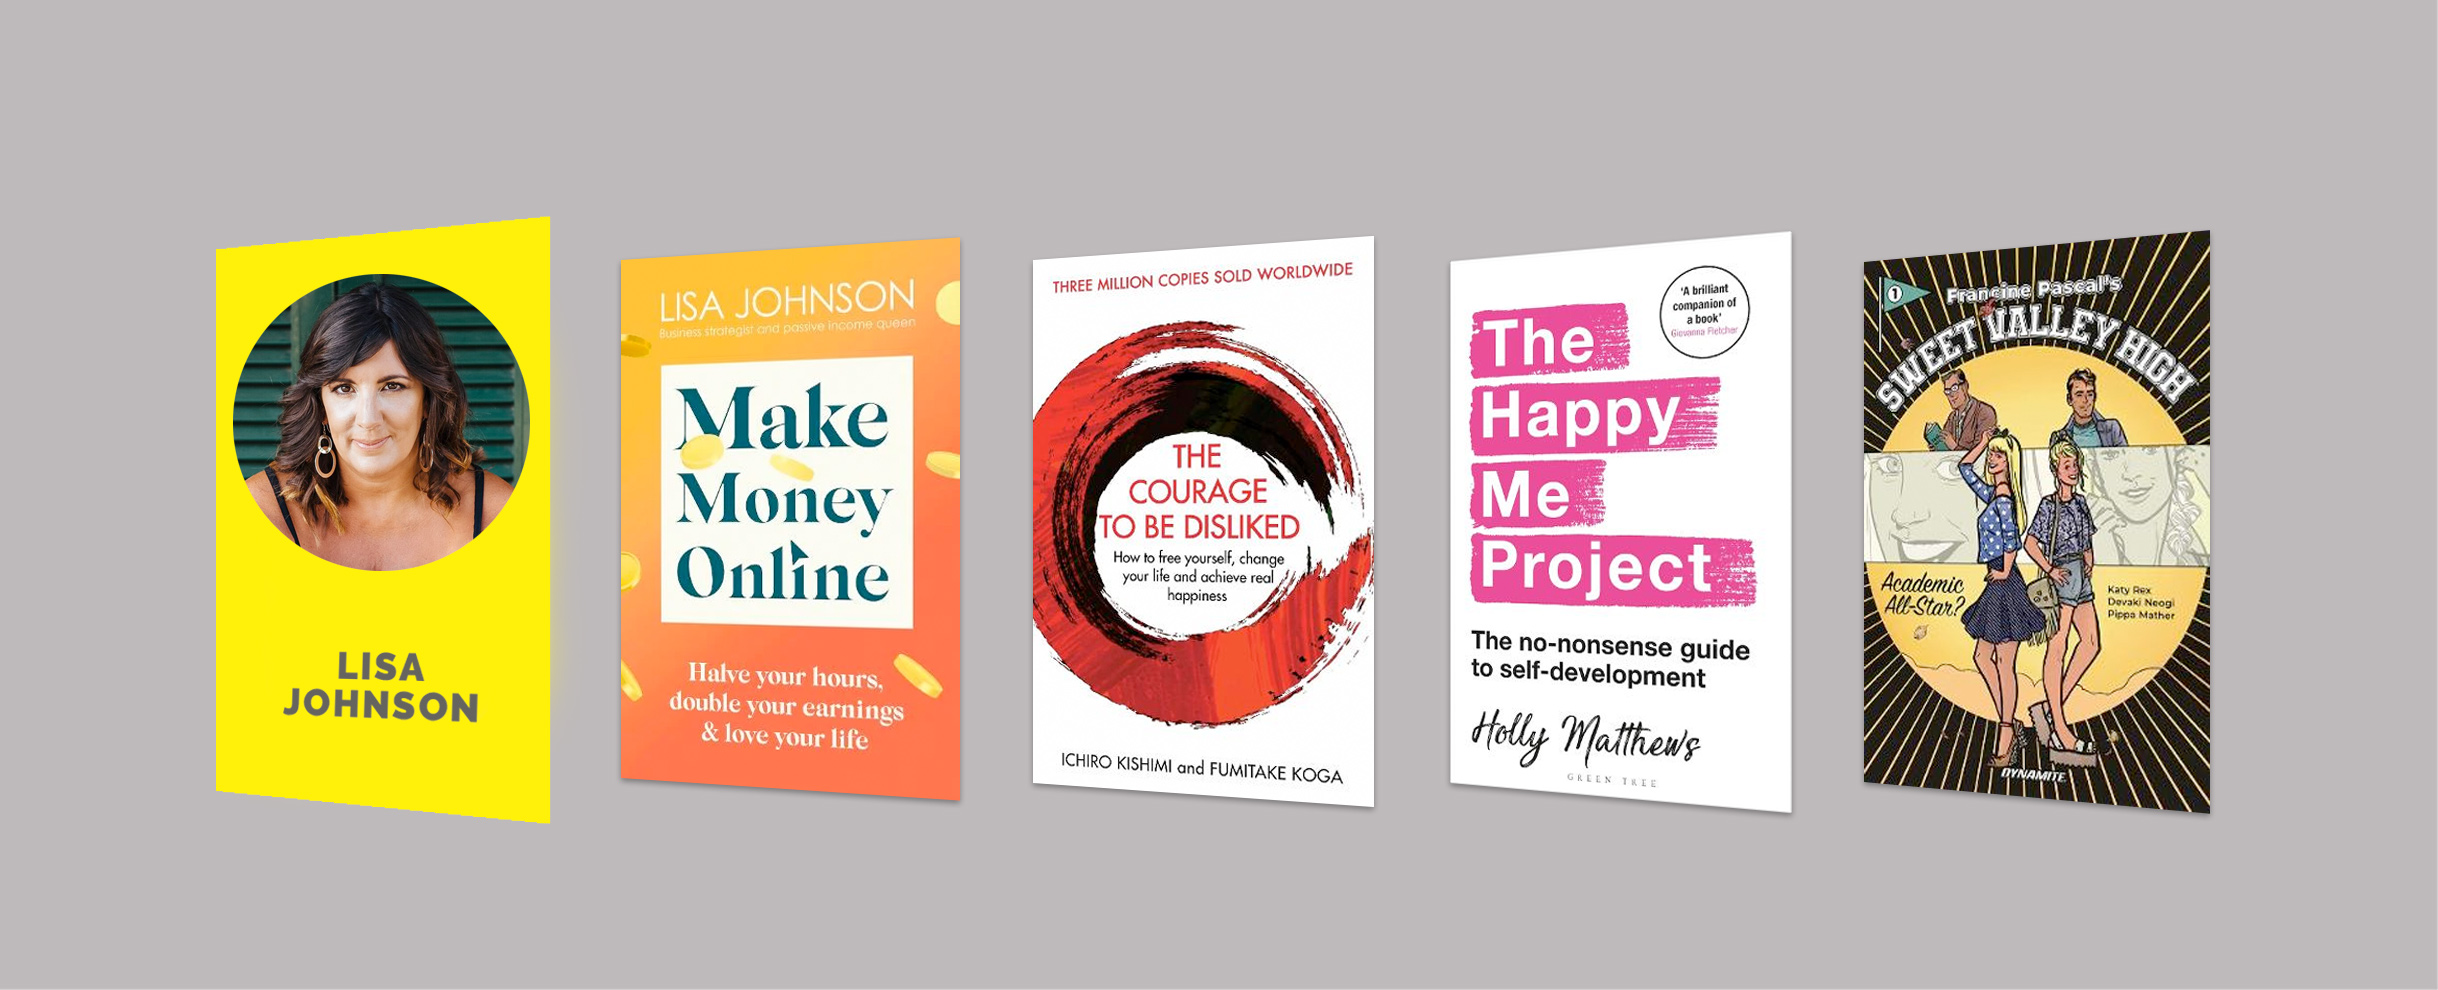 Interview with Lisa Johnson, author of Make Money Online: Your no-nonsense guide to passive income